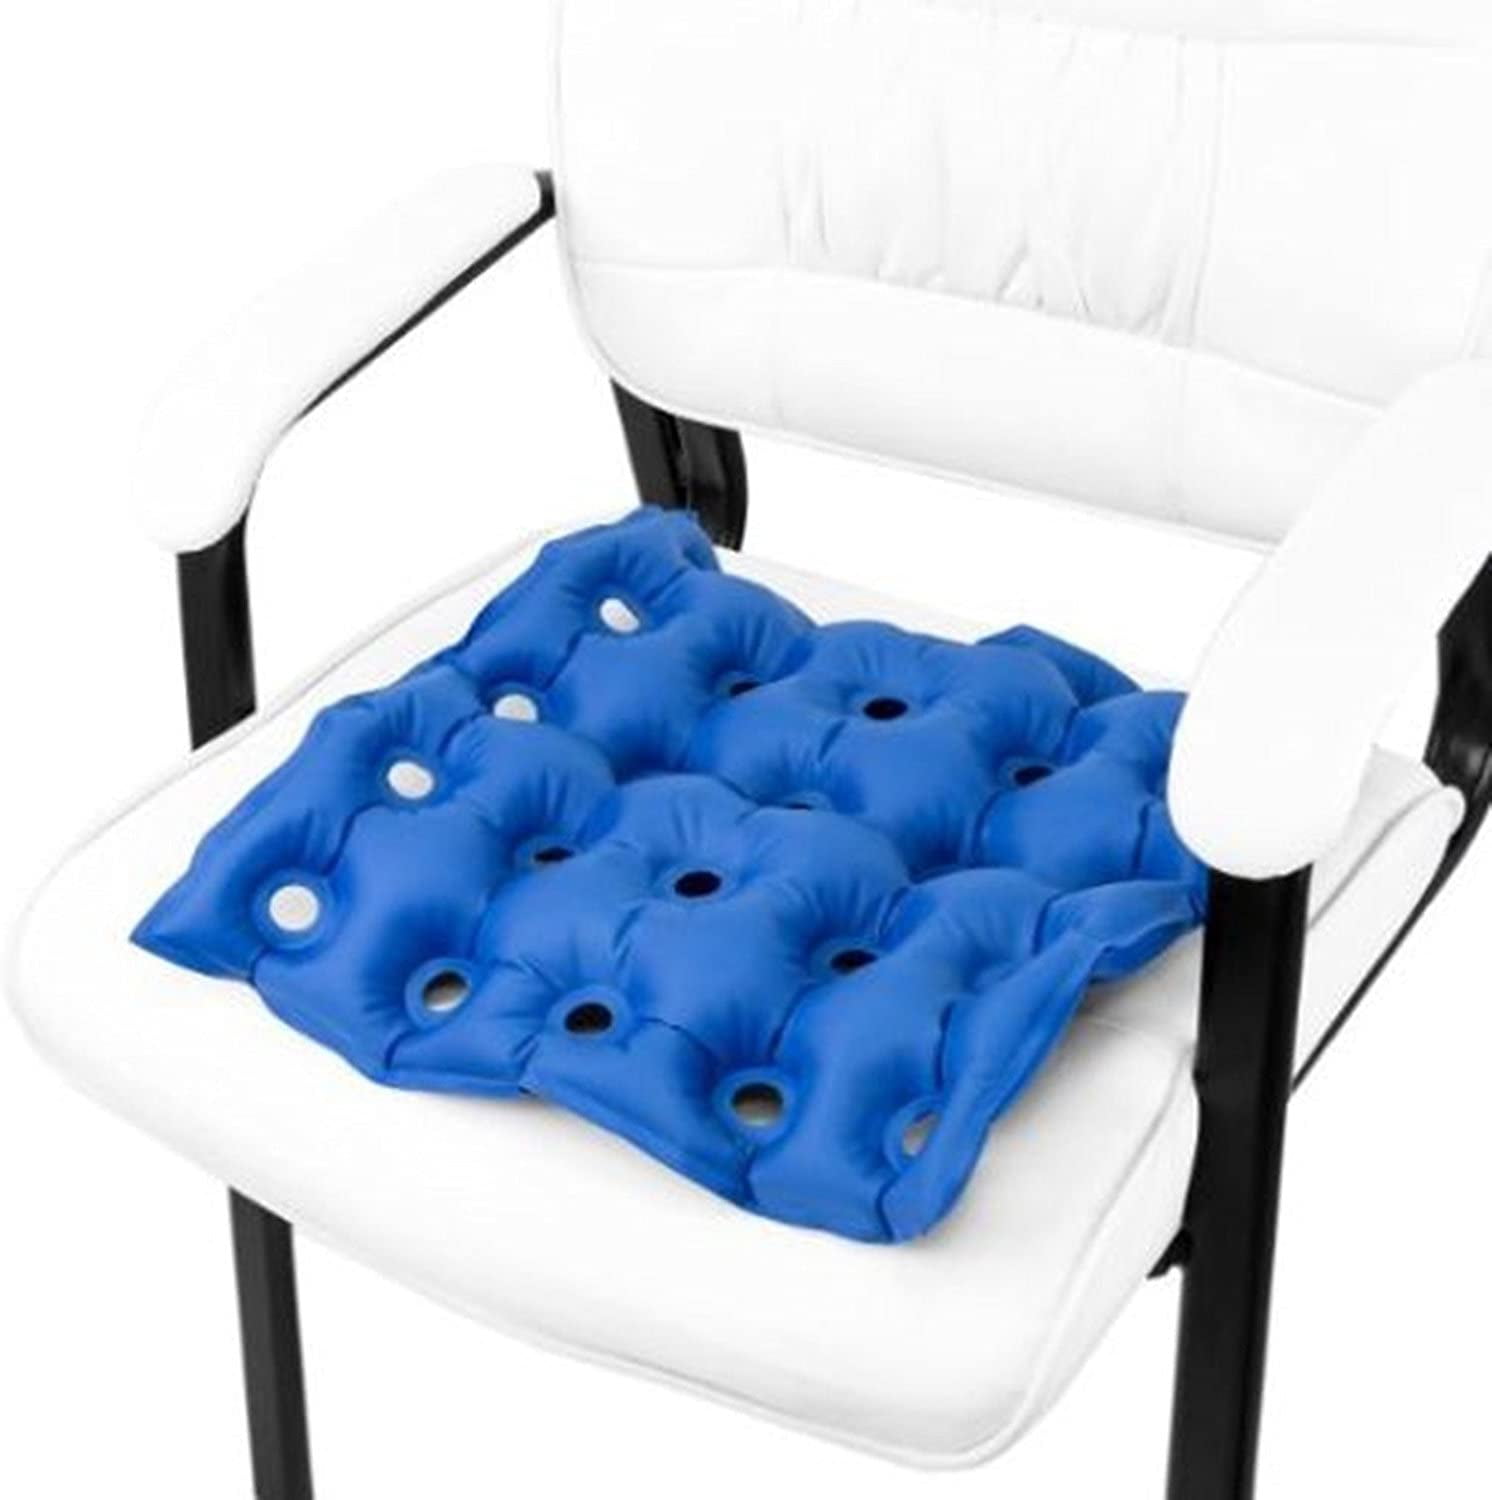  Pressure Ulcer Cushion Waffle ,Bed Sore Cushions for  Butt,Inflatable Seat Cushion Portable,Pressure Sore Cushions for Sitting,Wheelchair  Cushions for Pressure Relief,Recliner Cushions for Elderly Pad : Home &  Kitchen